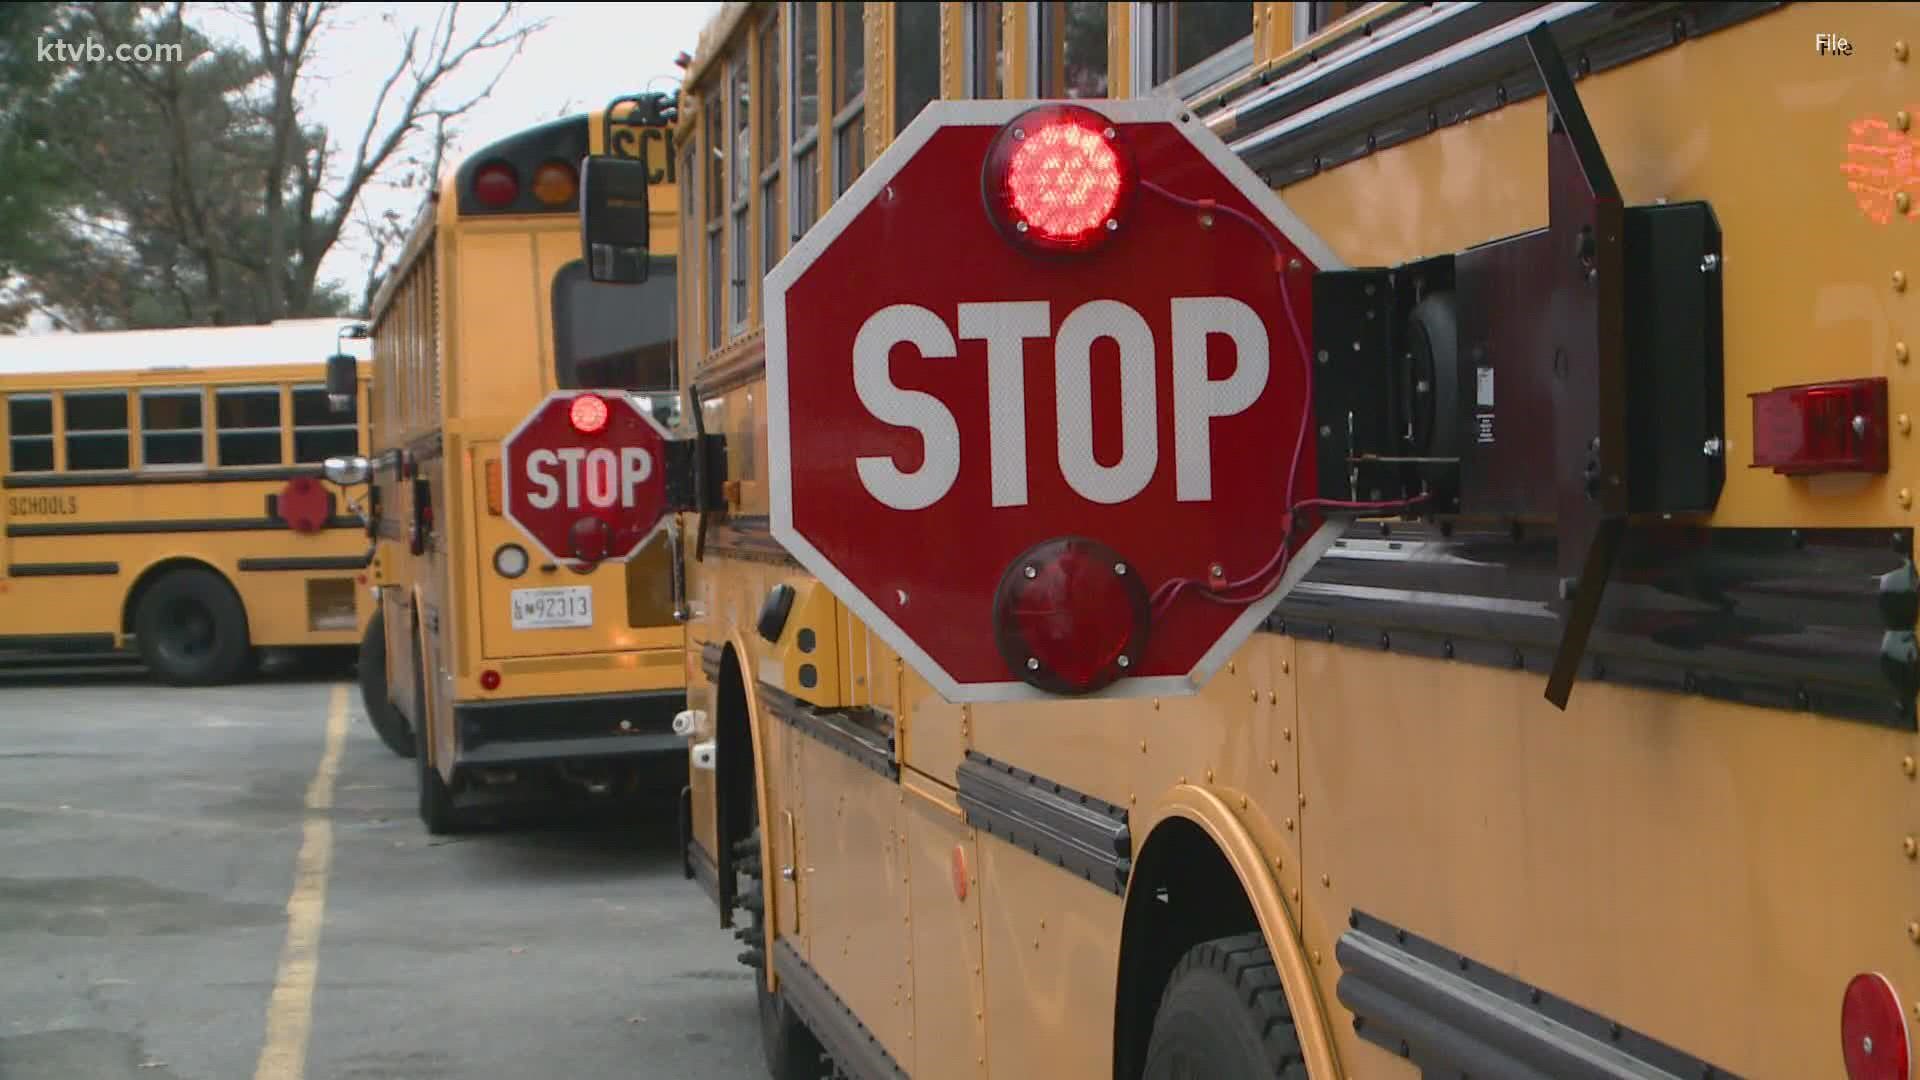 Not everyone knows the rules about when to stop for buses, but getting educated is crucial to keeping kids safe.